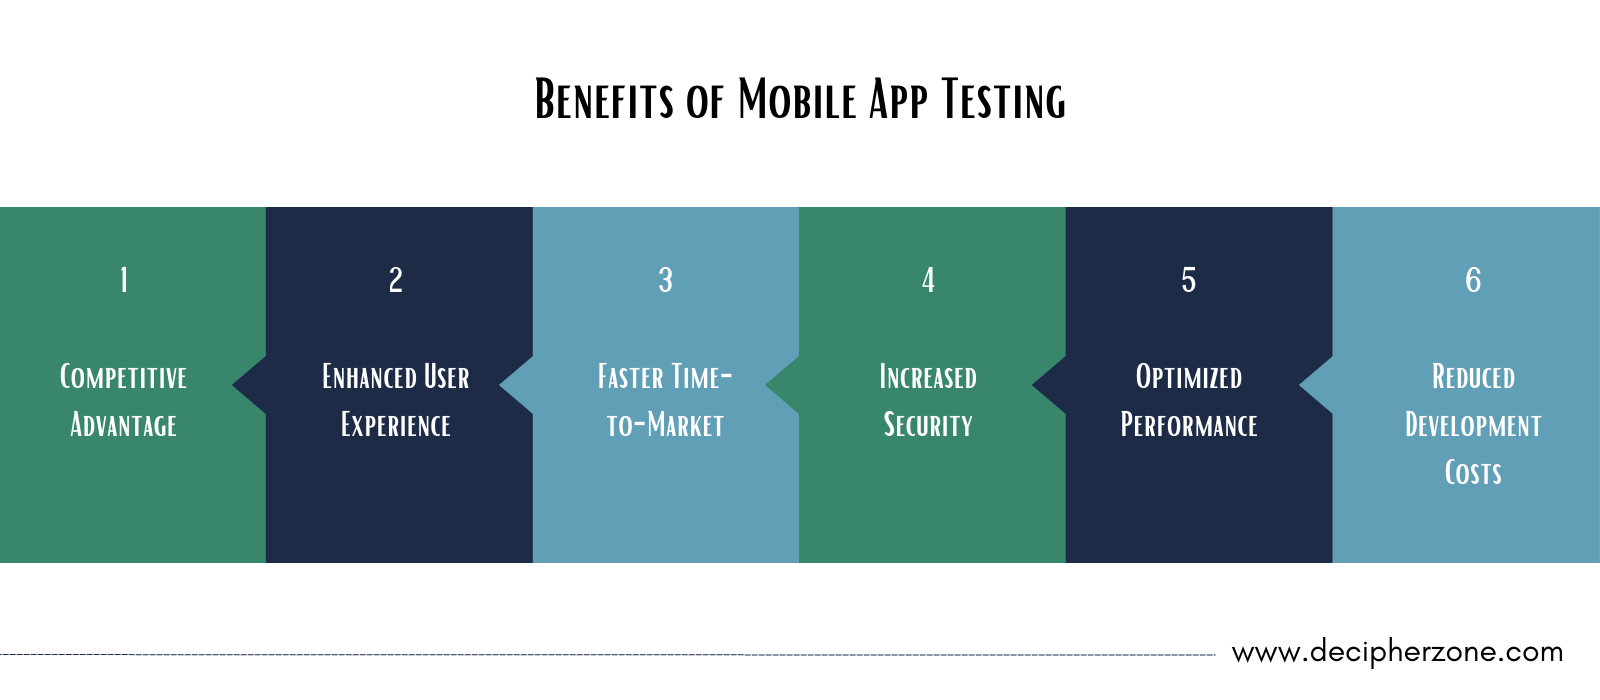 Benefits of Mobile App Testing